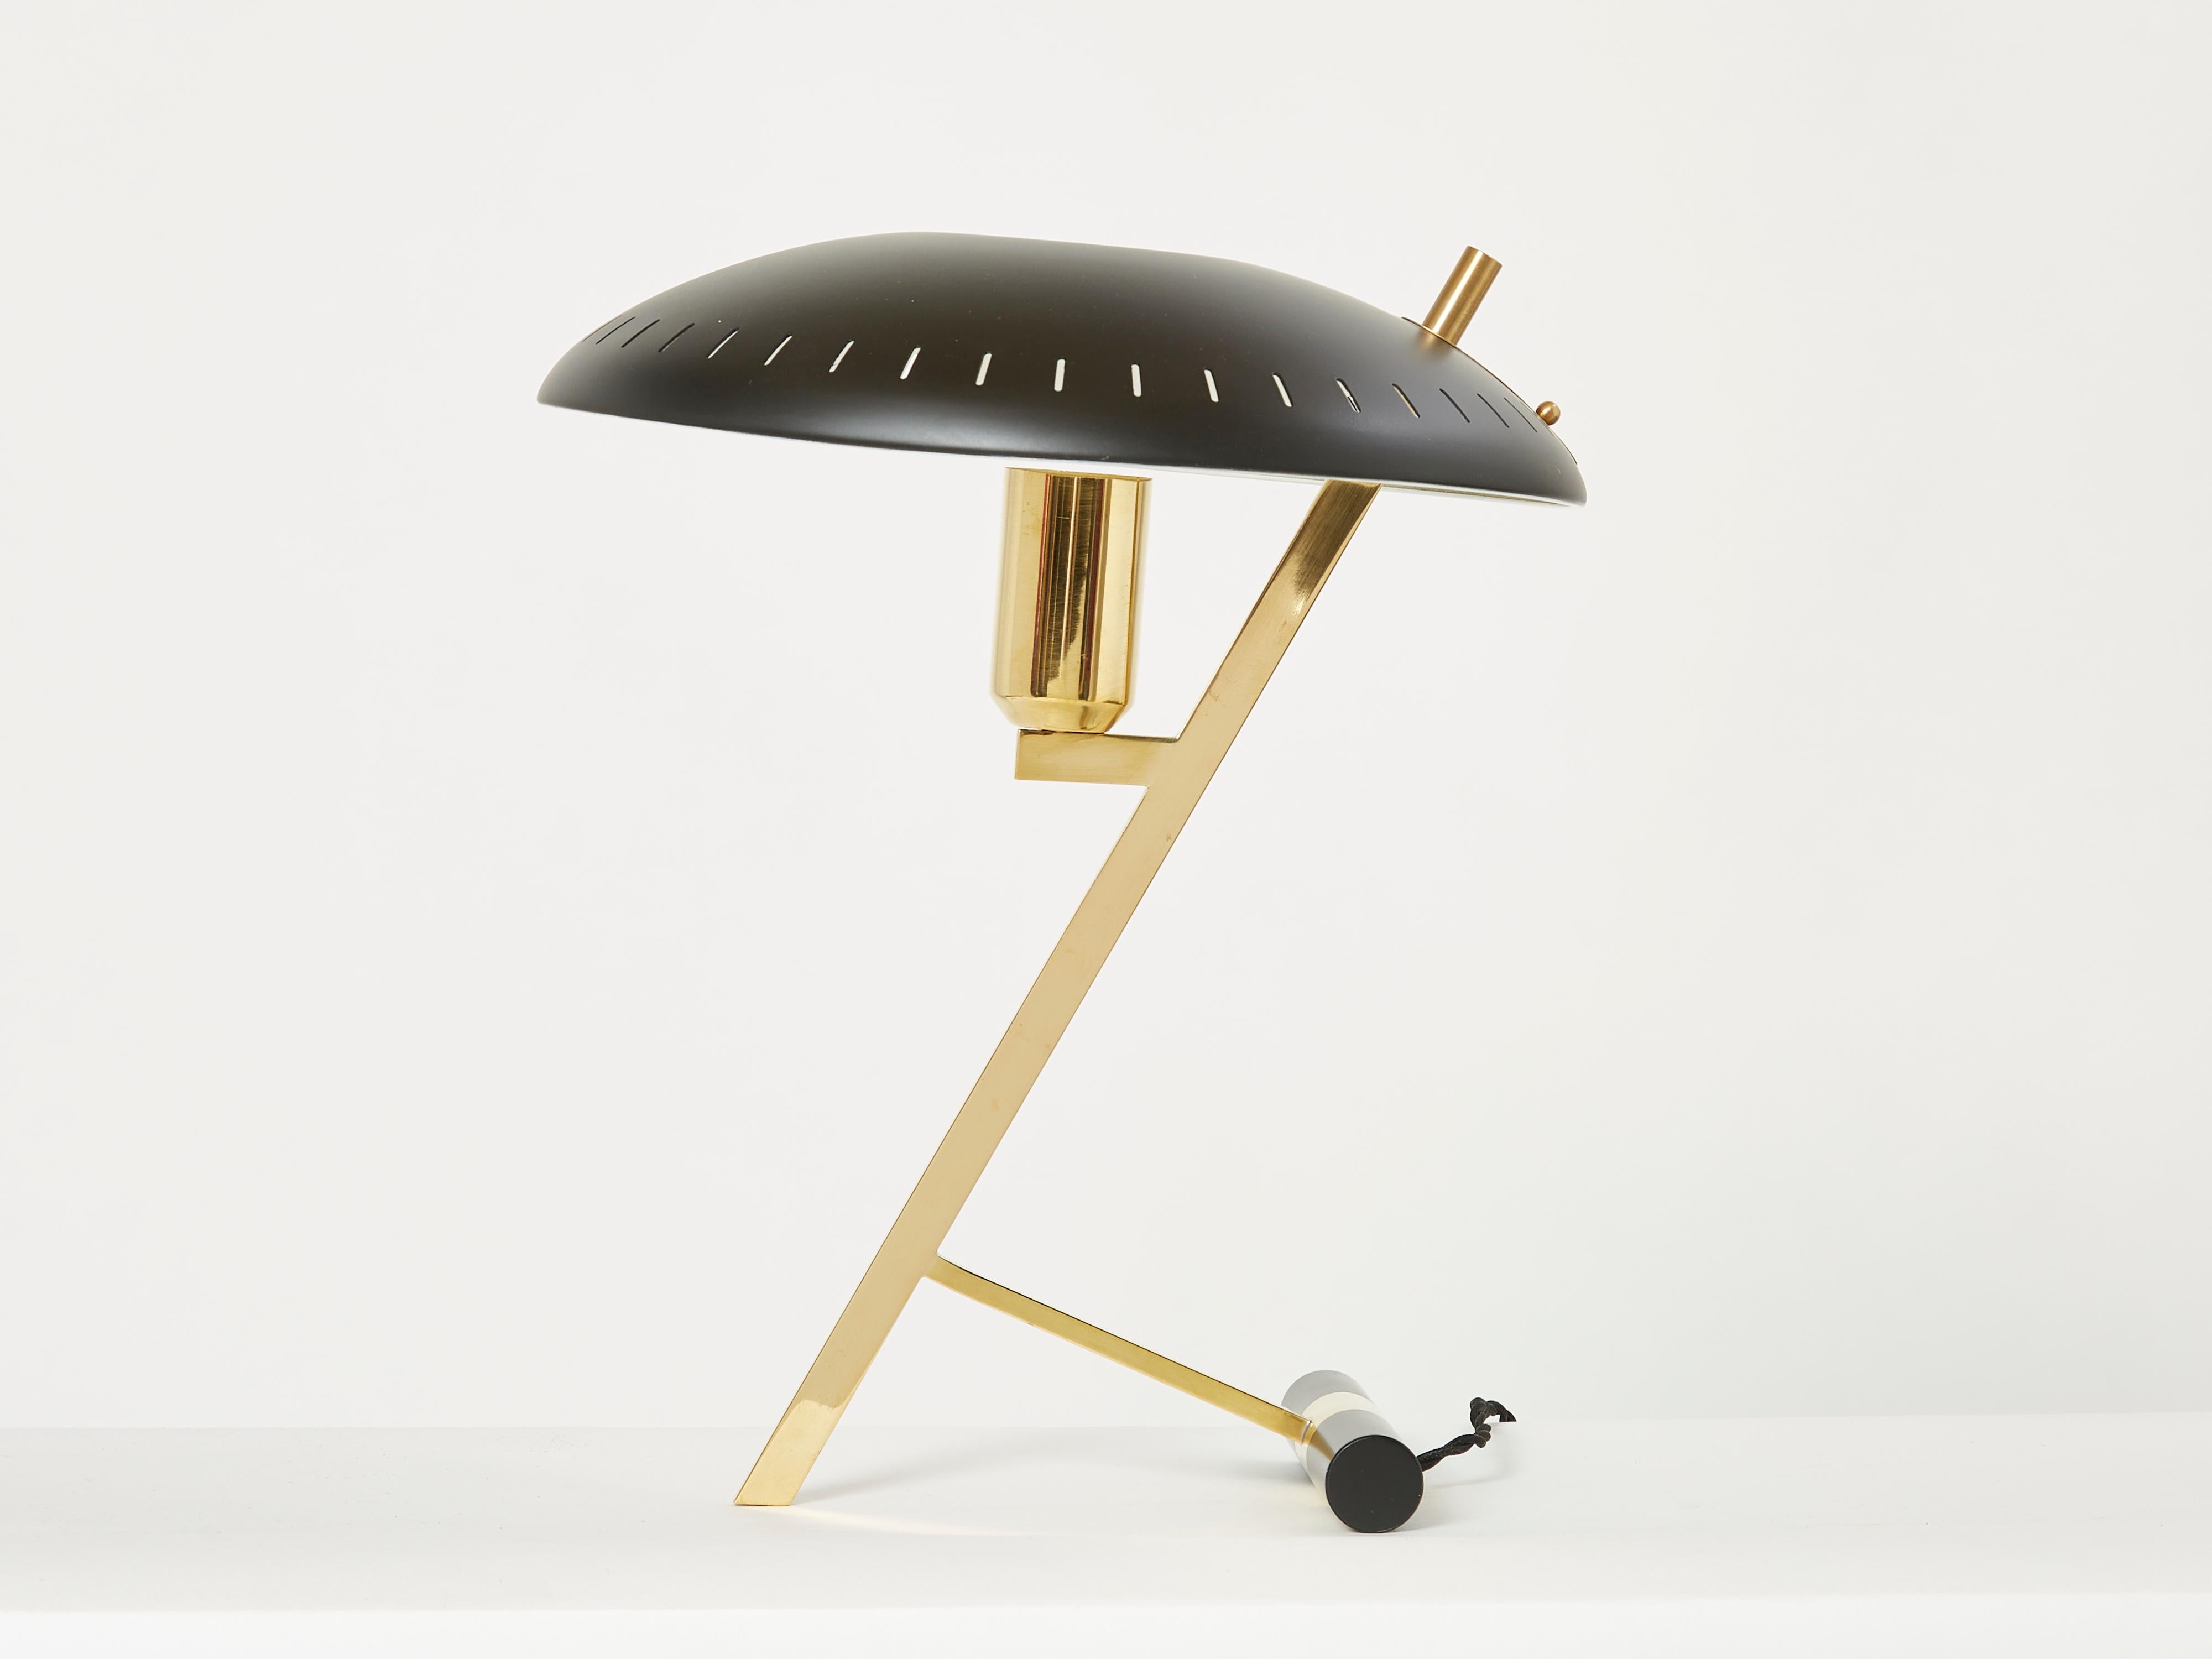 This beautiful desk lamp, model Z or Decora, was designed by Louis Kalff in the 1950s and edited by Philips. It is made of solid brass, with in black lacquered metal lampshade. This lamp is an iconic creation of the designer but also a classic